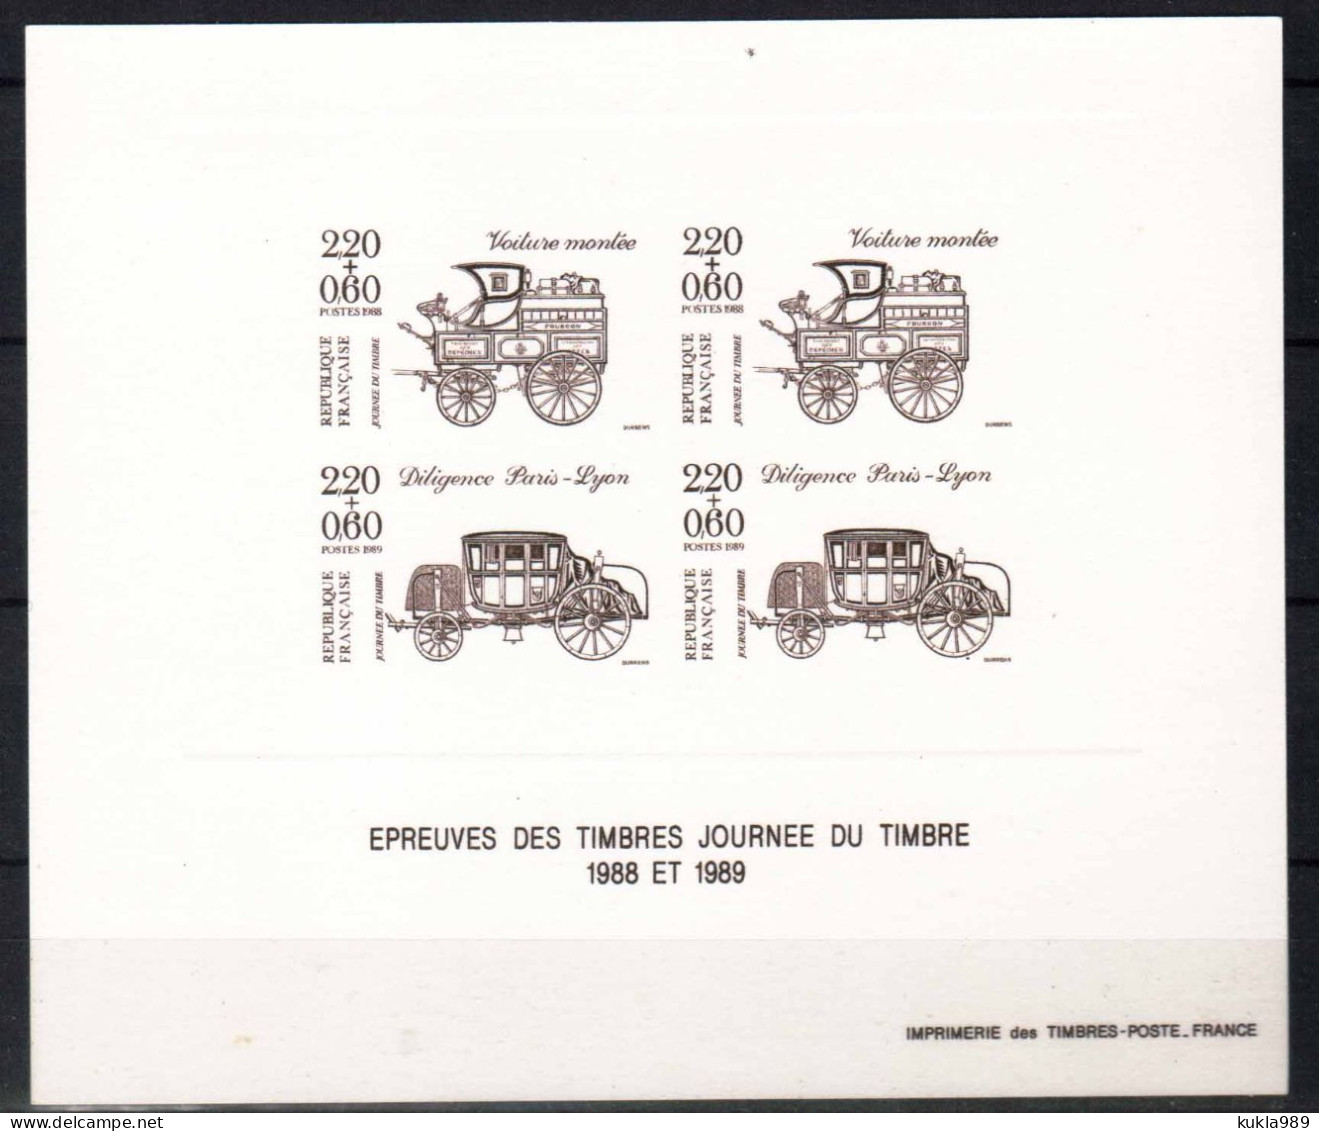 FRANCE STAMPS .  CARS PROOF,1988. MNH - Proofs, Unissued, Experimental Vignettes